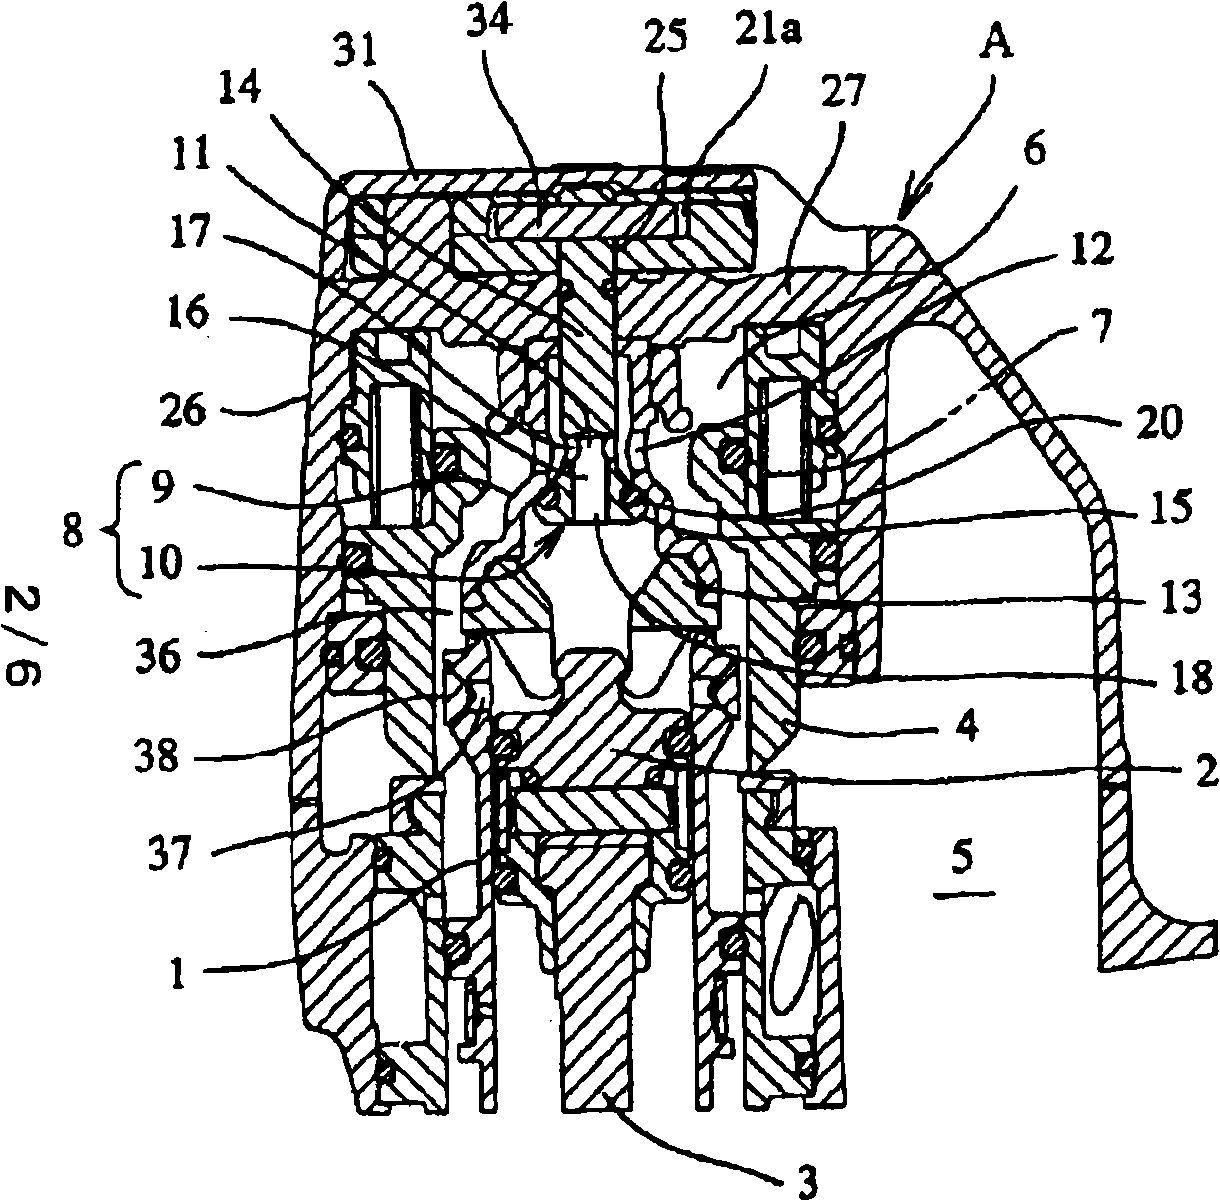 Air pressure type screw nail infiltrating device